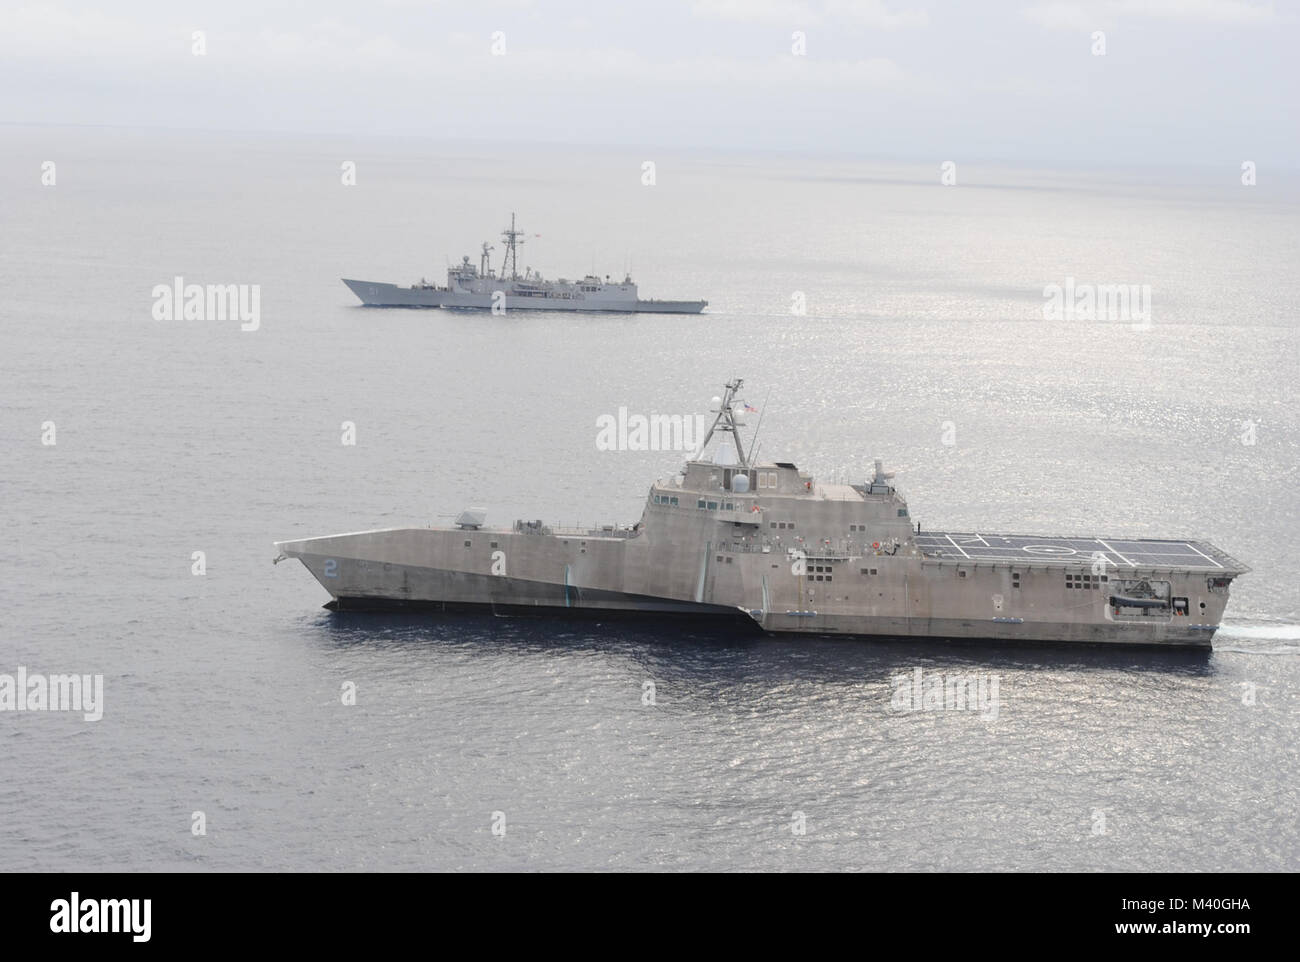 EASTERN PACIFIC (Jan. 06, 2015) - USS Gary (FFG 51) and USS Independence (LCS 2) conduct a photo exercise off the coast of Central America. USS Gary is currently underway in support of Operation Martillo, a joint operation with the U.S. Coast Guard and partner nations within the 4th Fleet area of responsibility. (U.S. Navy photo courtesy of Aircrewman Tactical Helicopter 2nd Class Taylor Petre/Released) 150106-N-WI904-004 by U.S. Naval Forces Southern Command  U.S. 4th Fleet Stock Photo